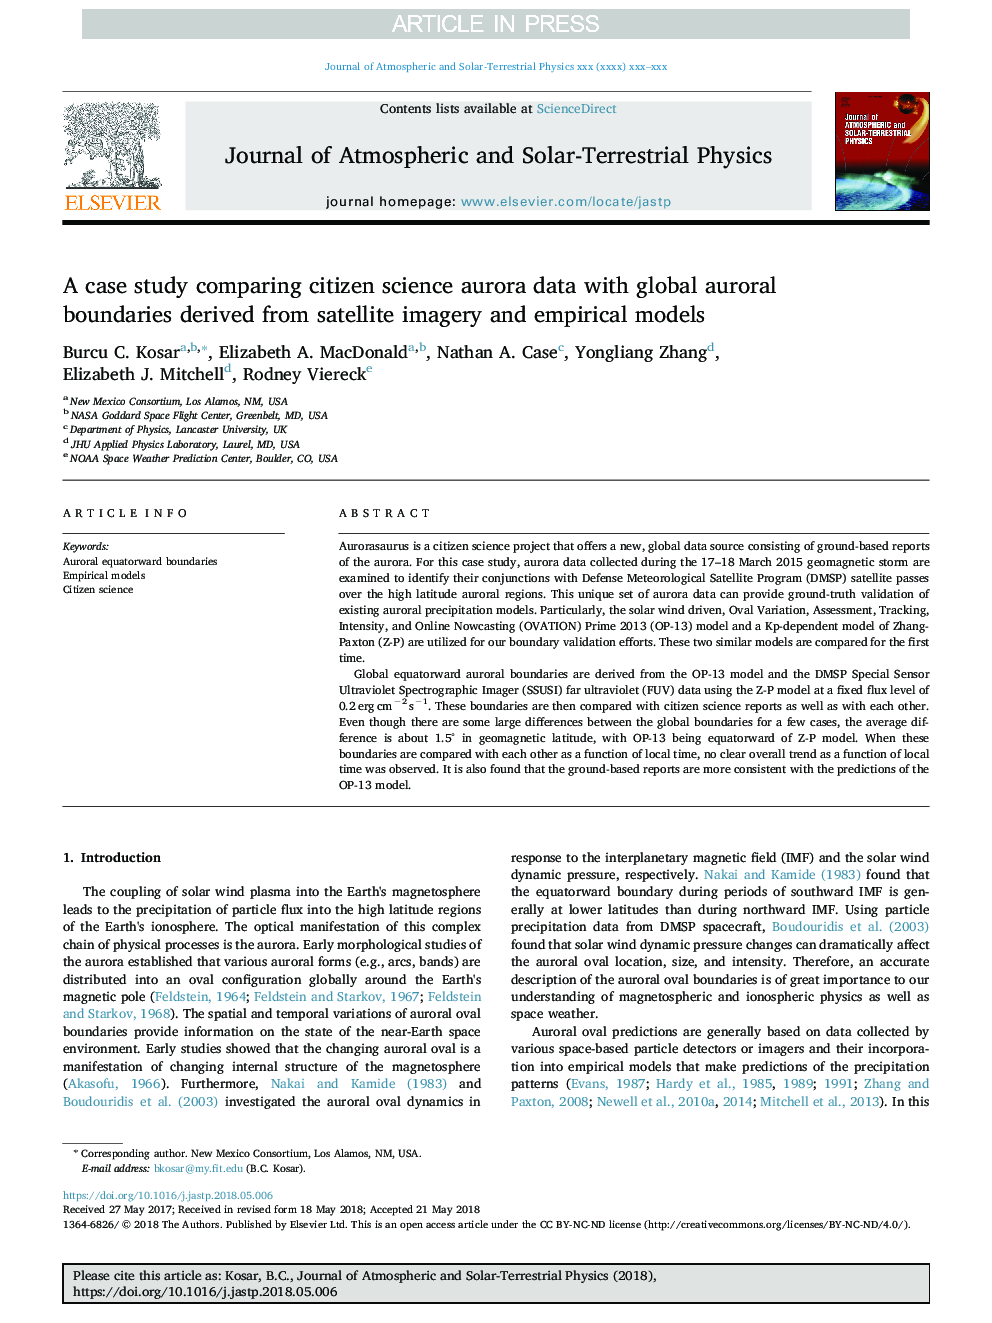 A case study comparing citizen science aurora data with global auroral boundaries derived from satellite imagery and empirical models